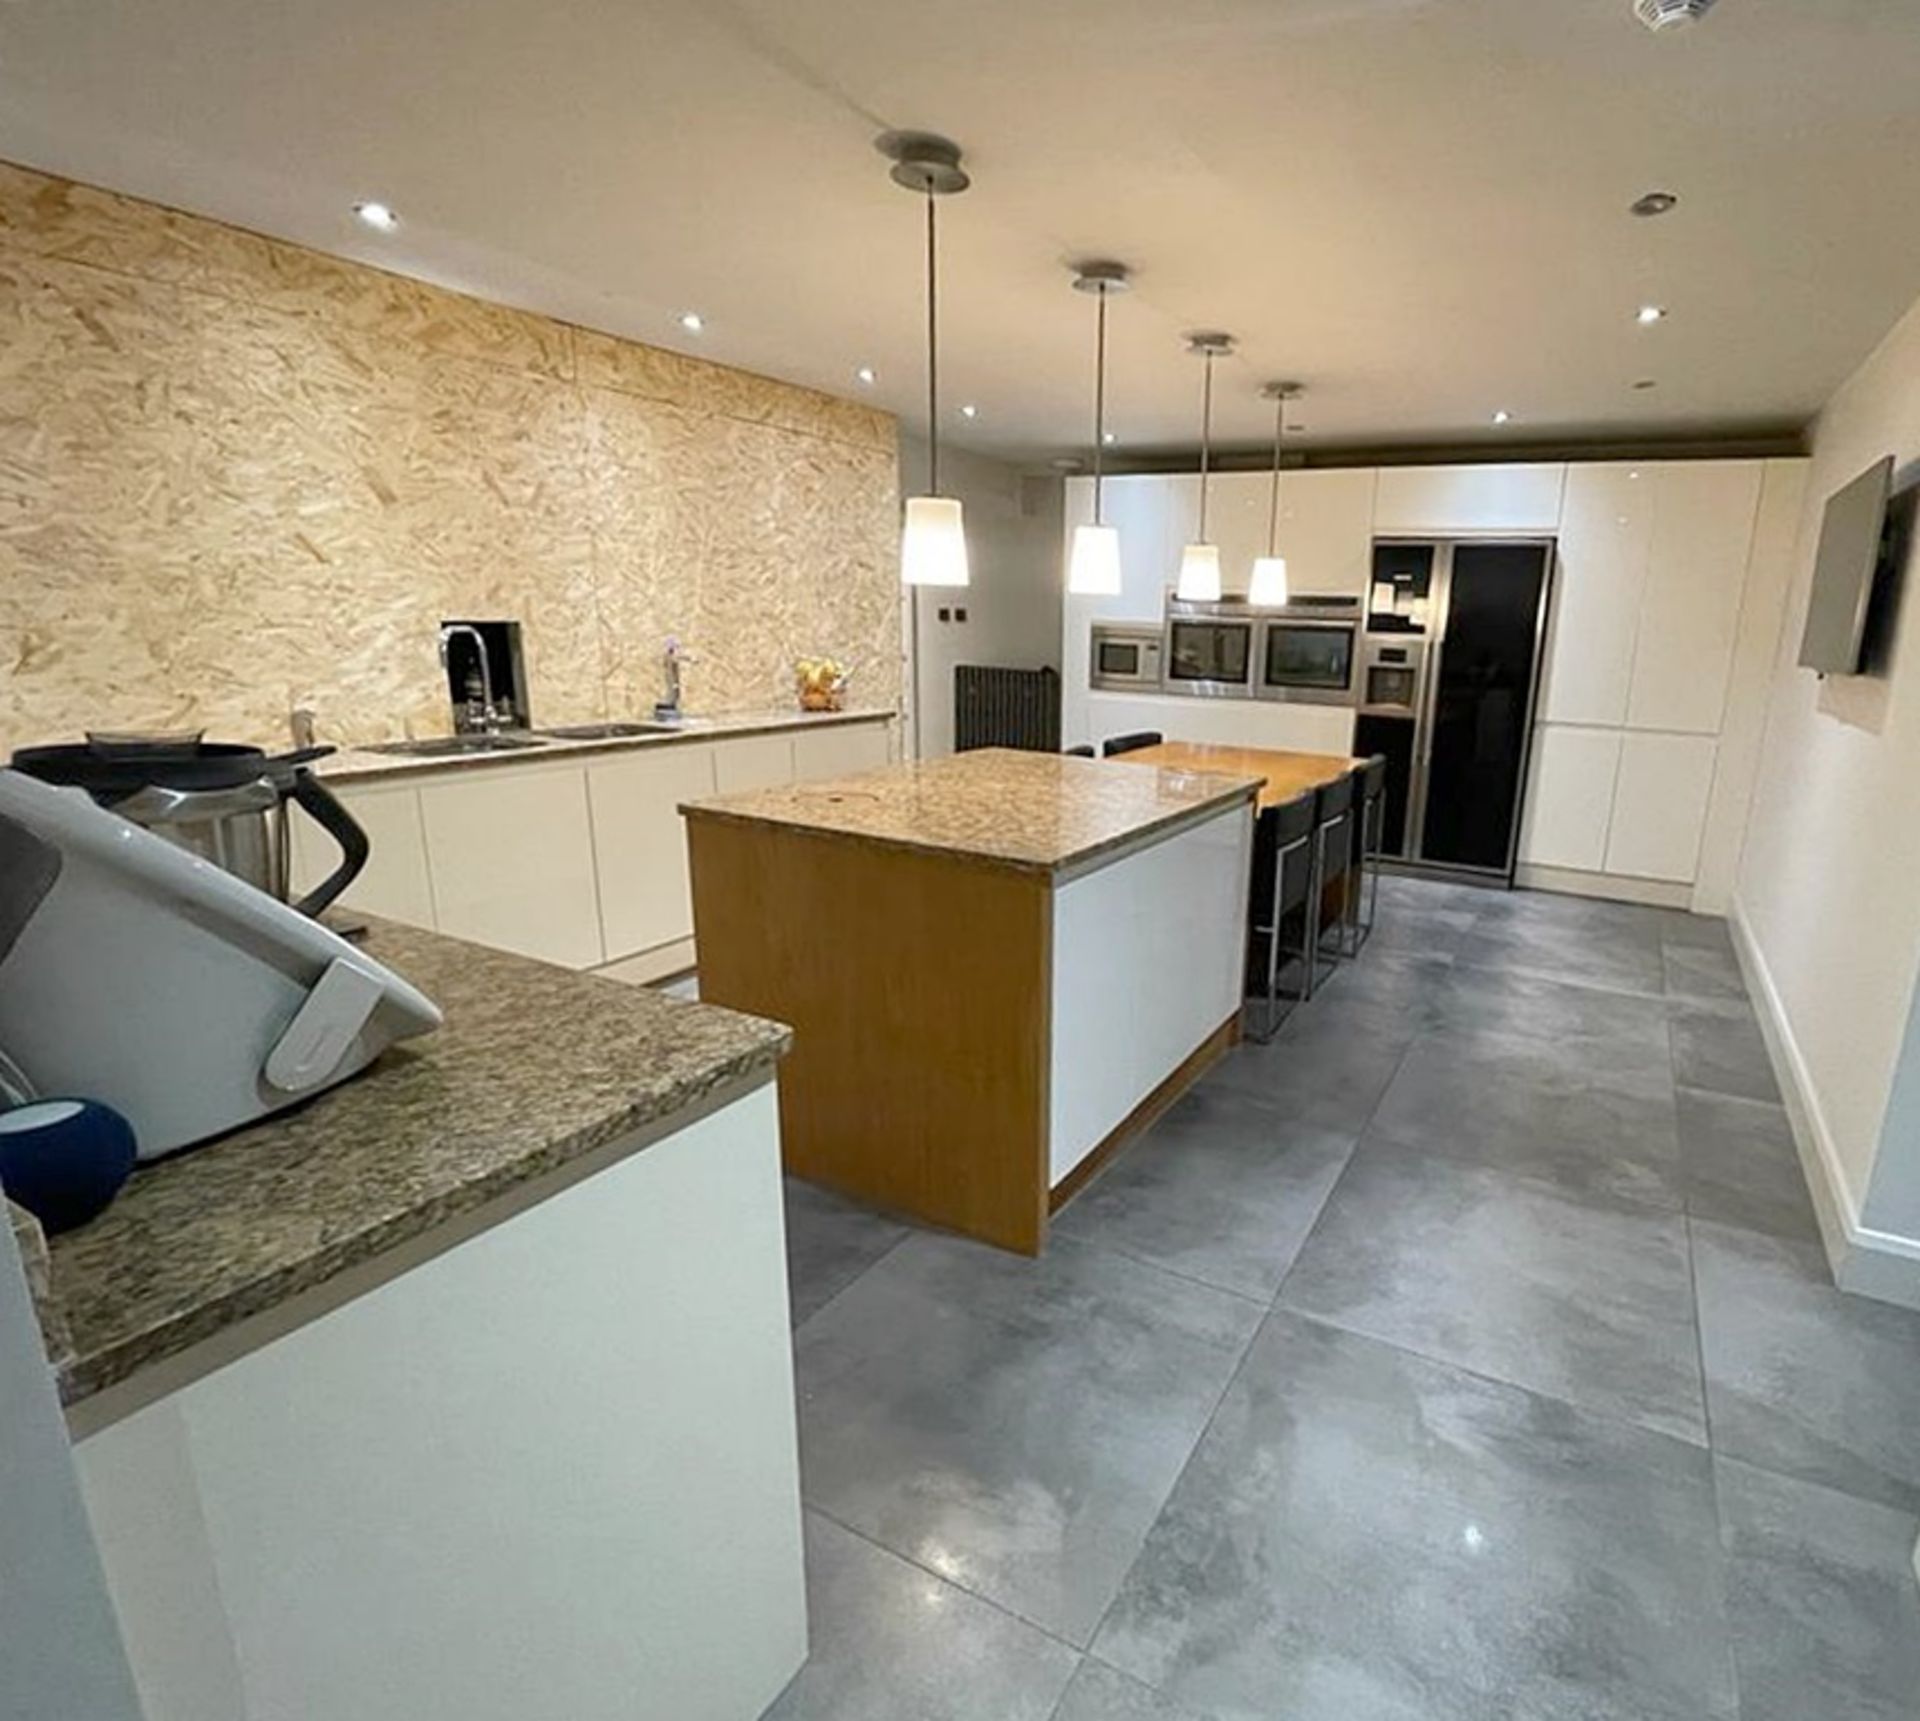 1 x Stunning PARAPAN Handleless Fitted Kitchen with Neff Appliances, Granite Worktops & Island - Image 7 of 126